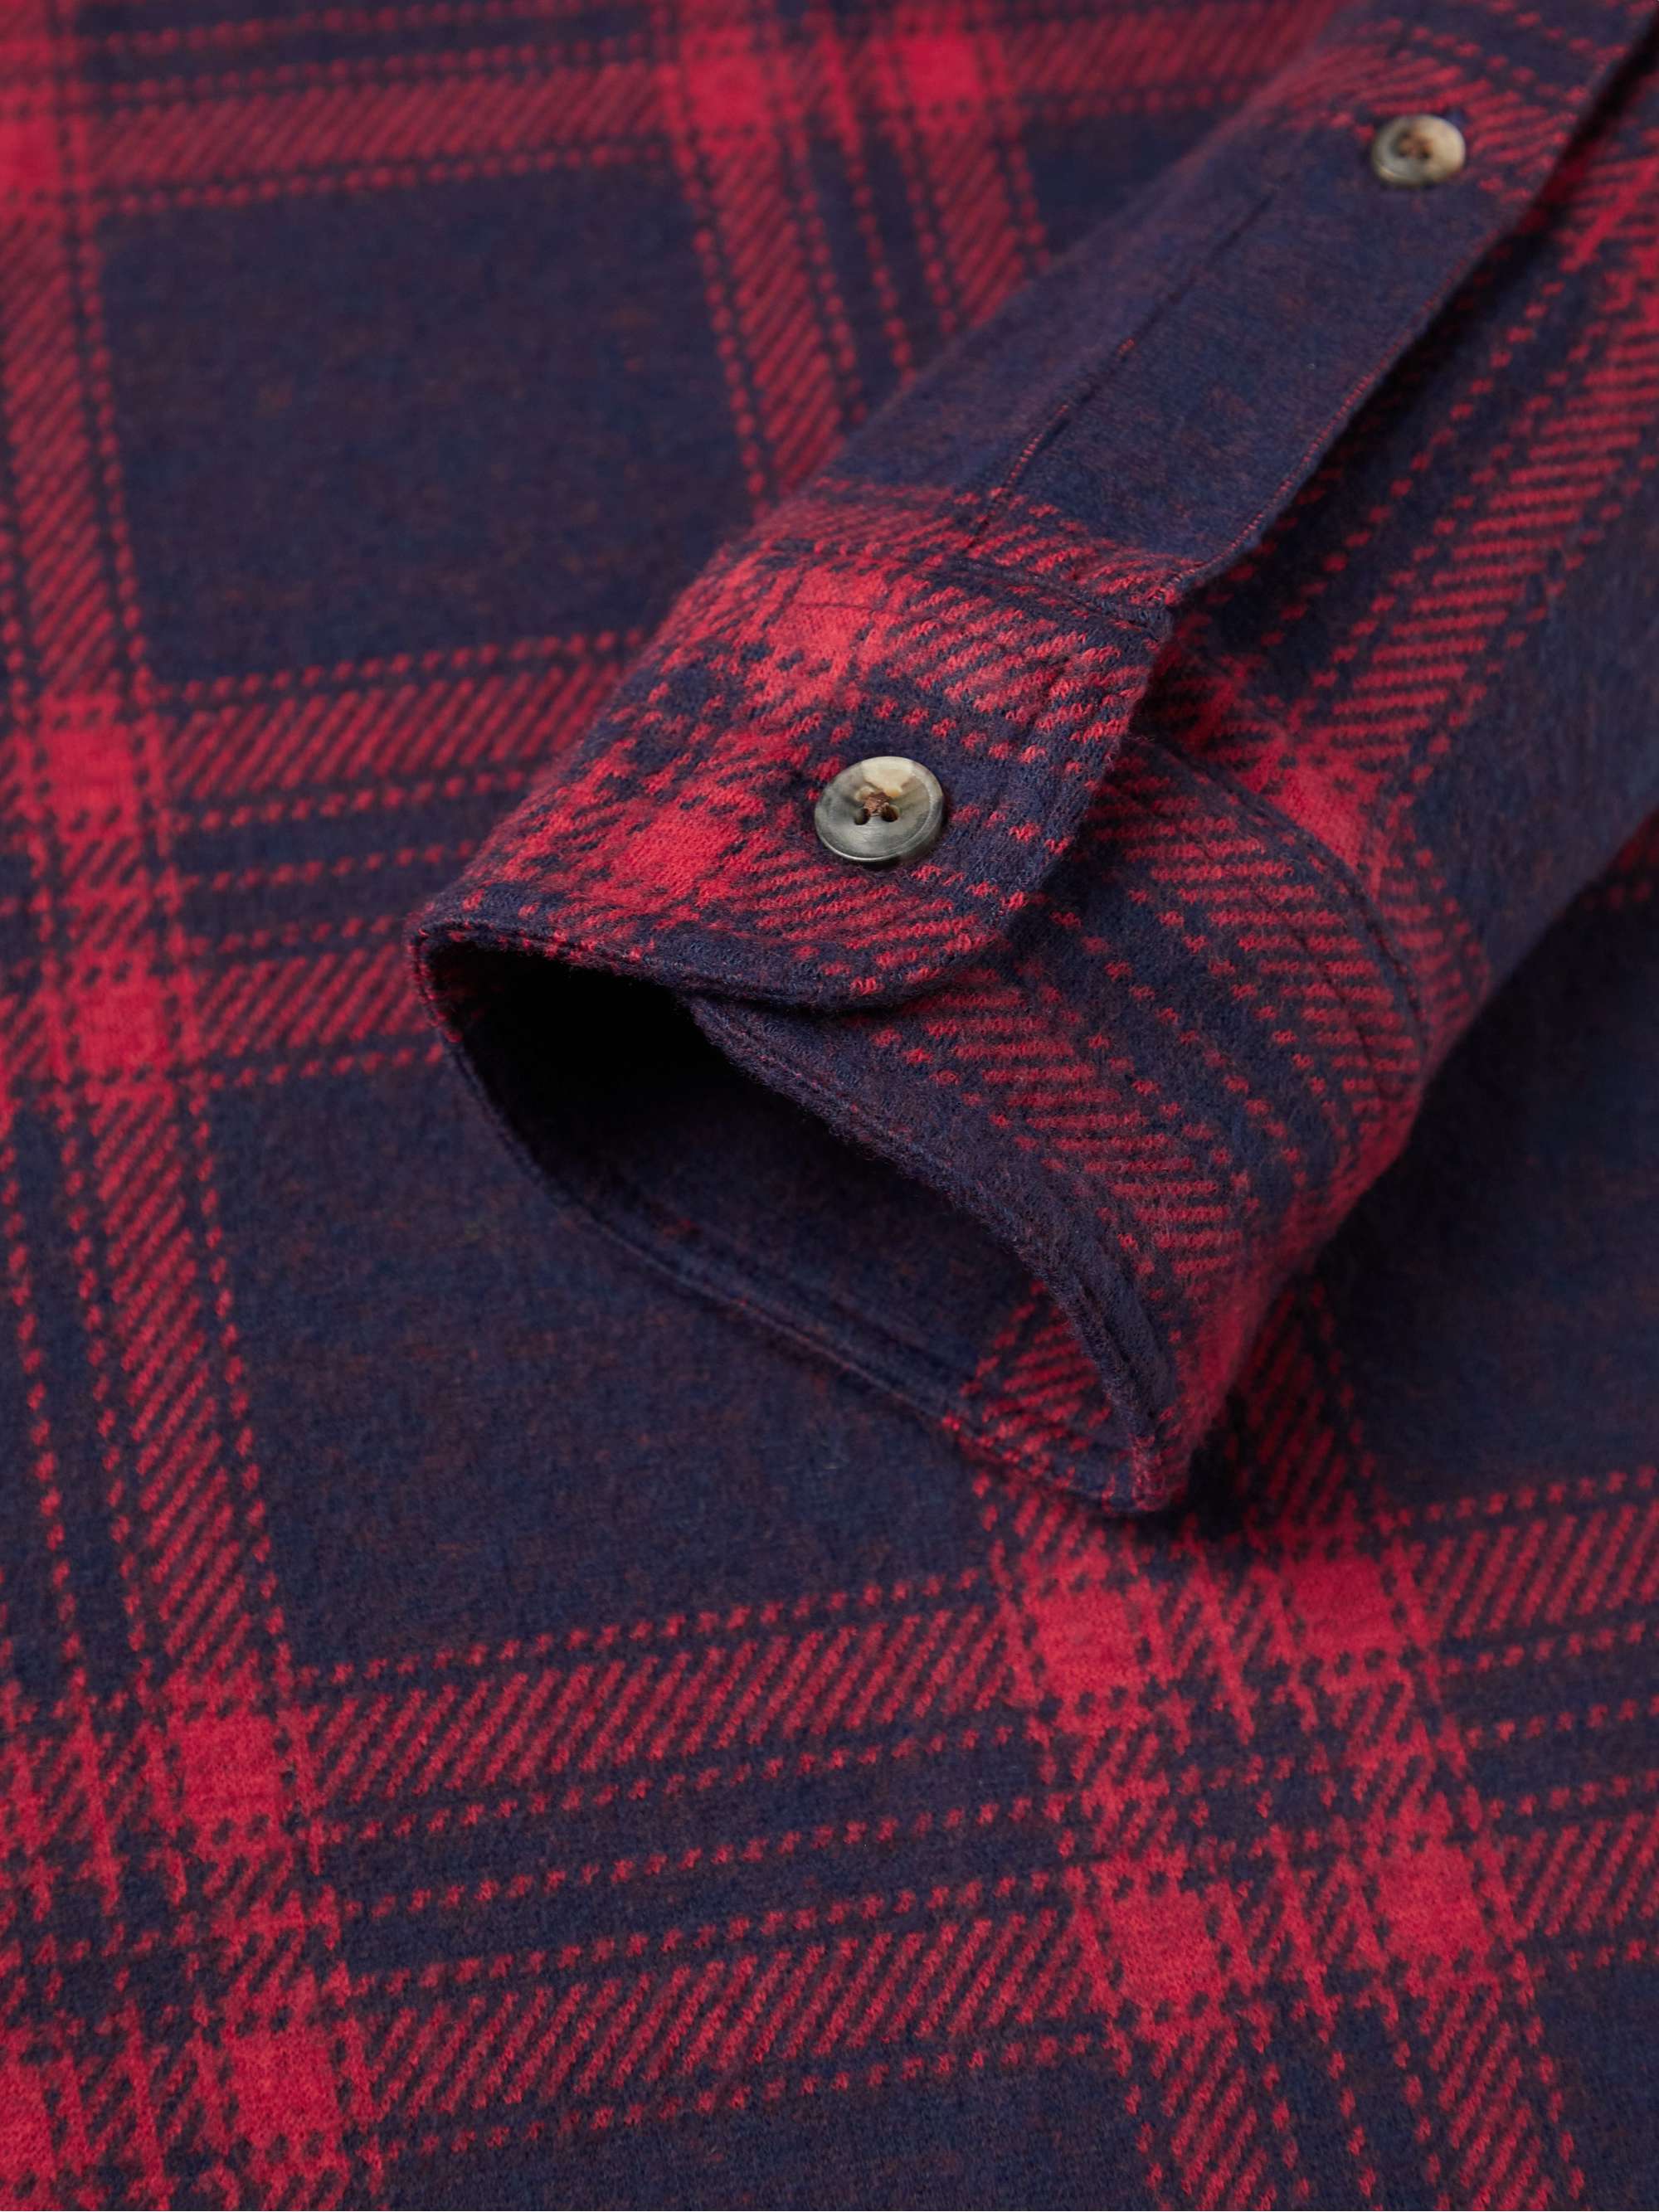 FAHERTY Legend Checked Flannel Shirt